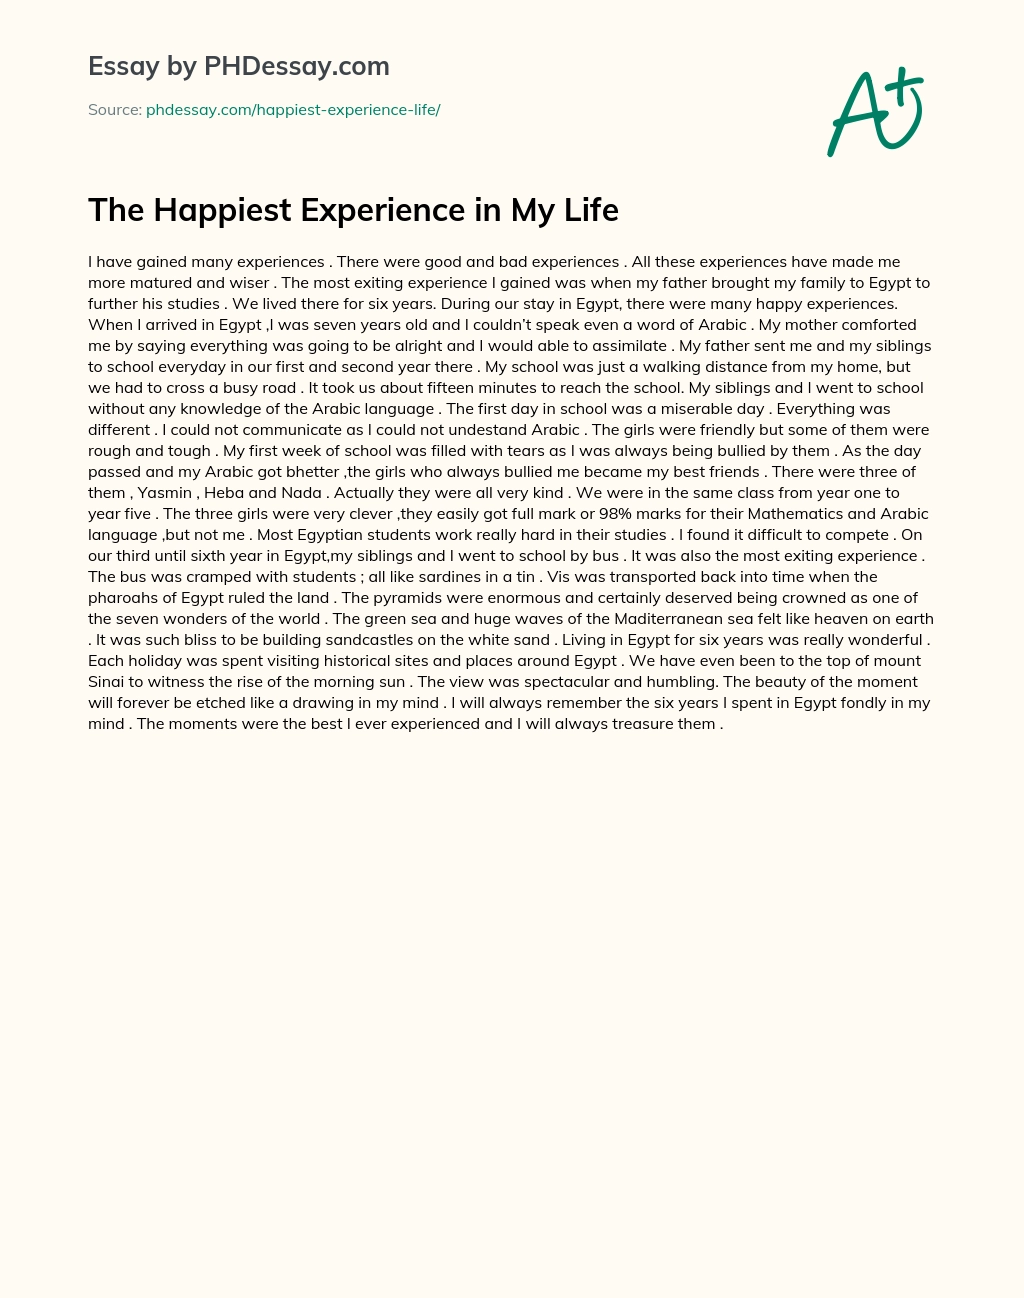 The Happiest Experience in My Life essay